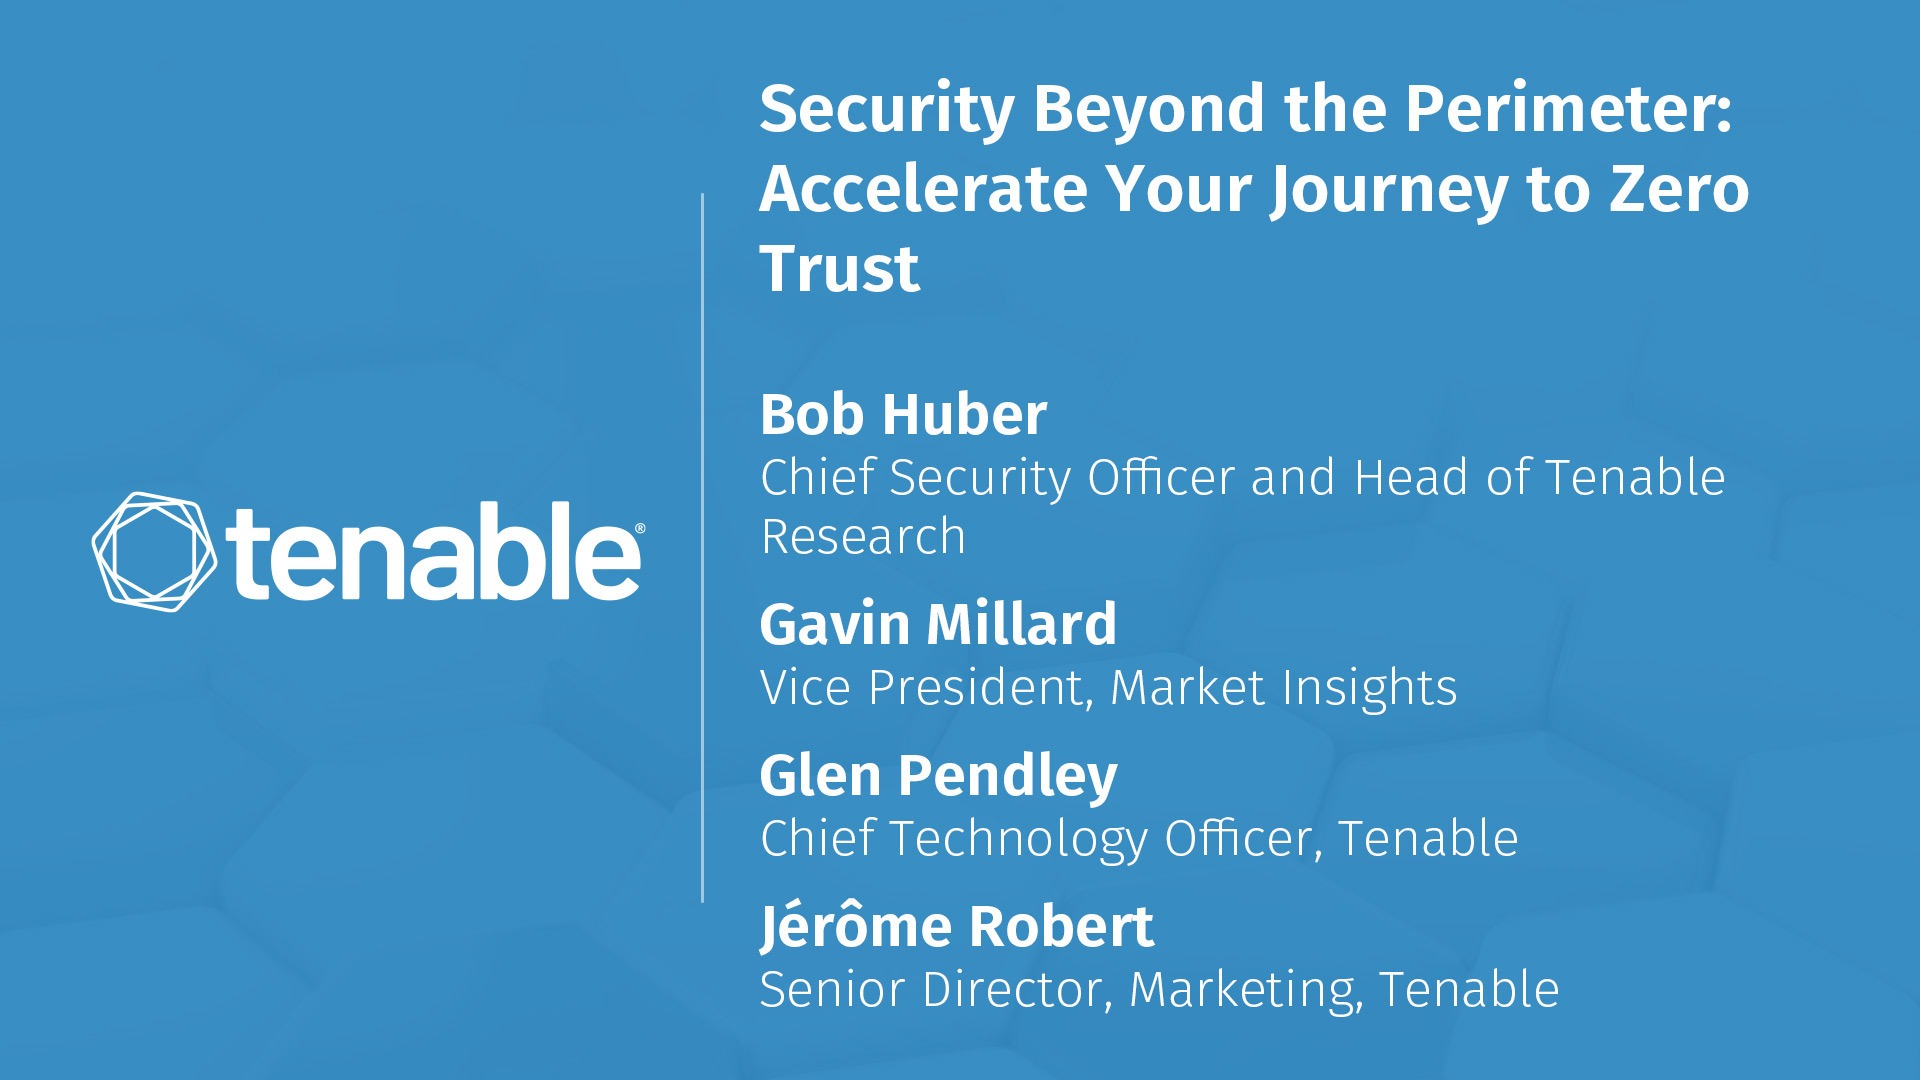 Security Beyond the Perimeter: Accelerate Your Journey to Zero Trust